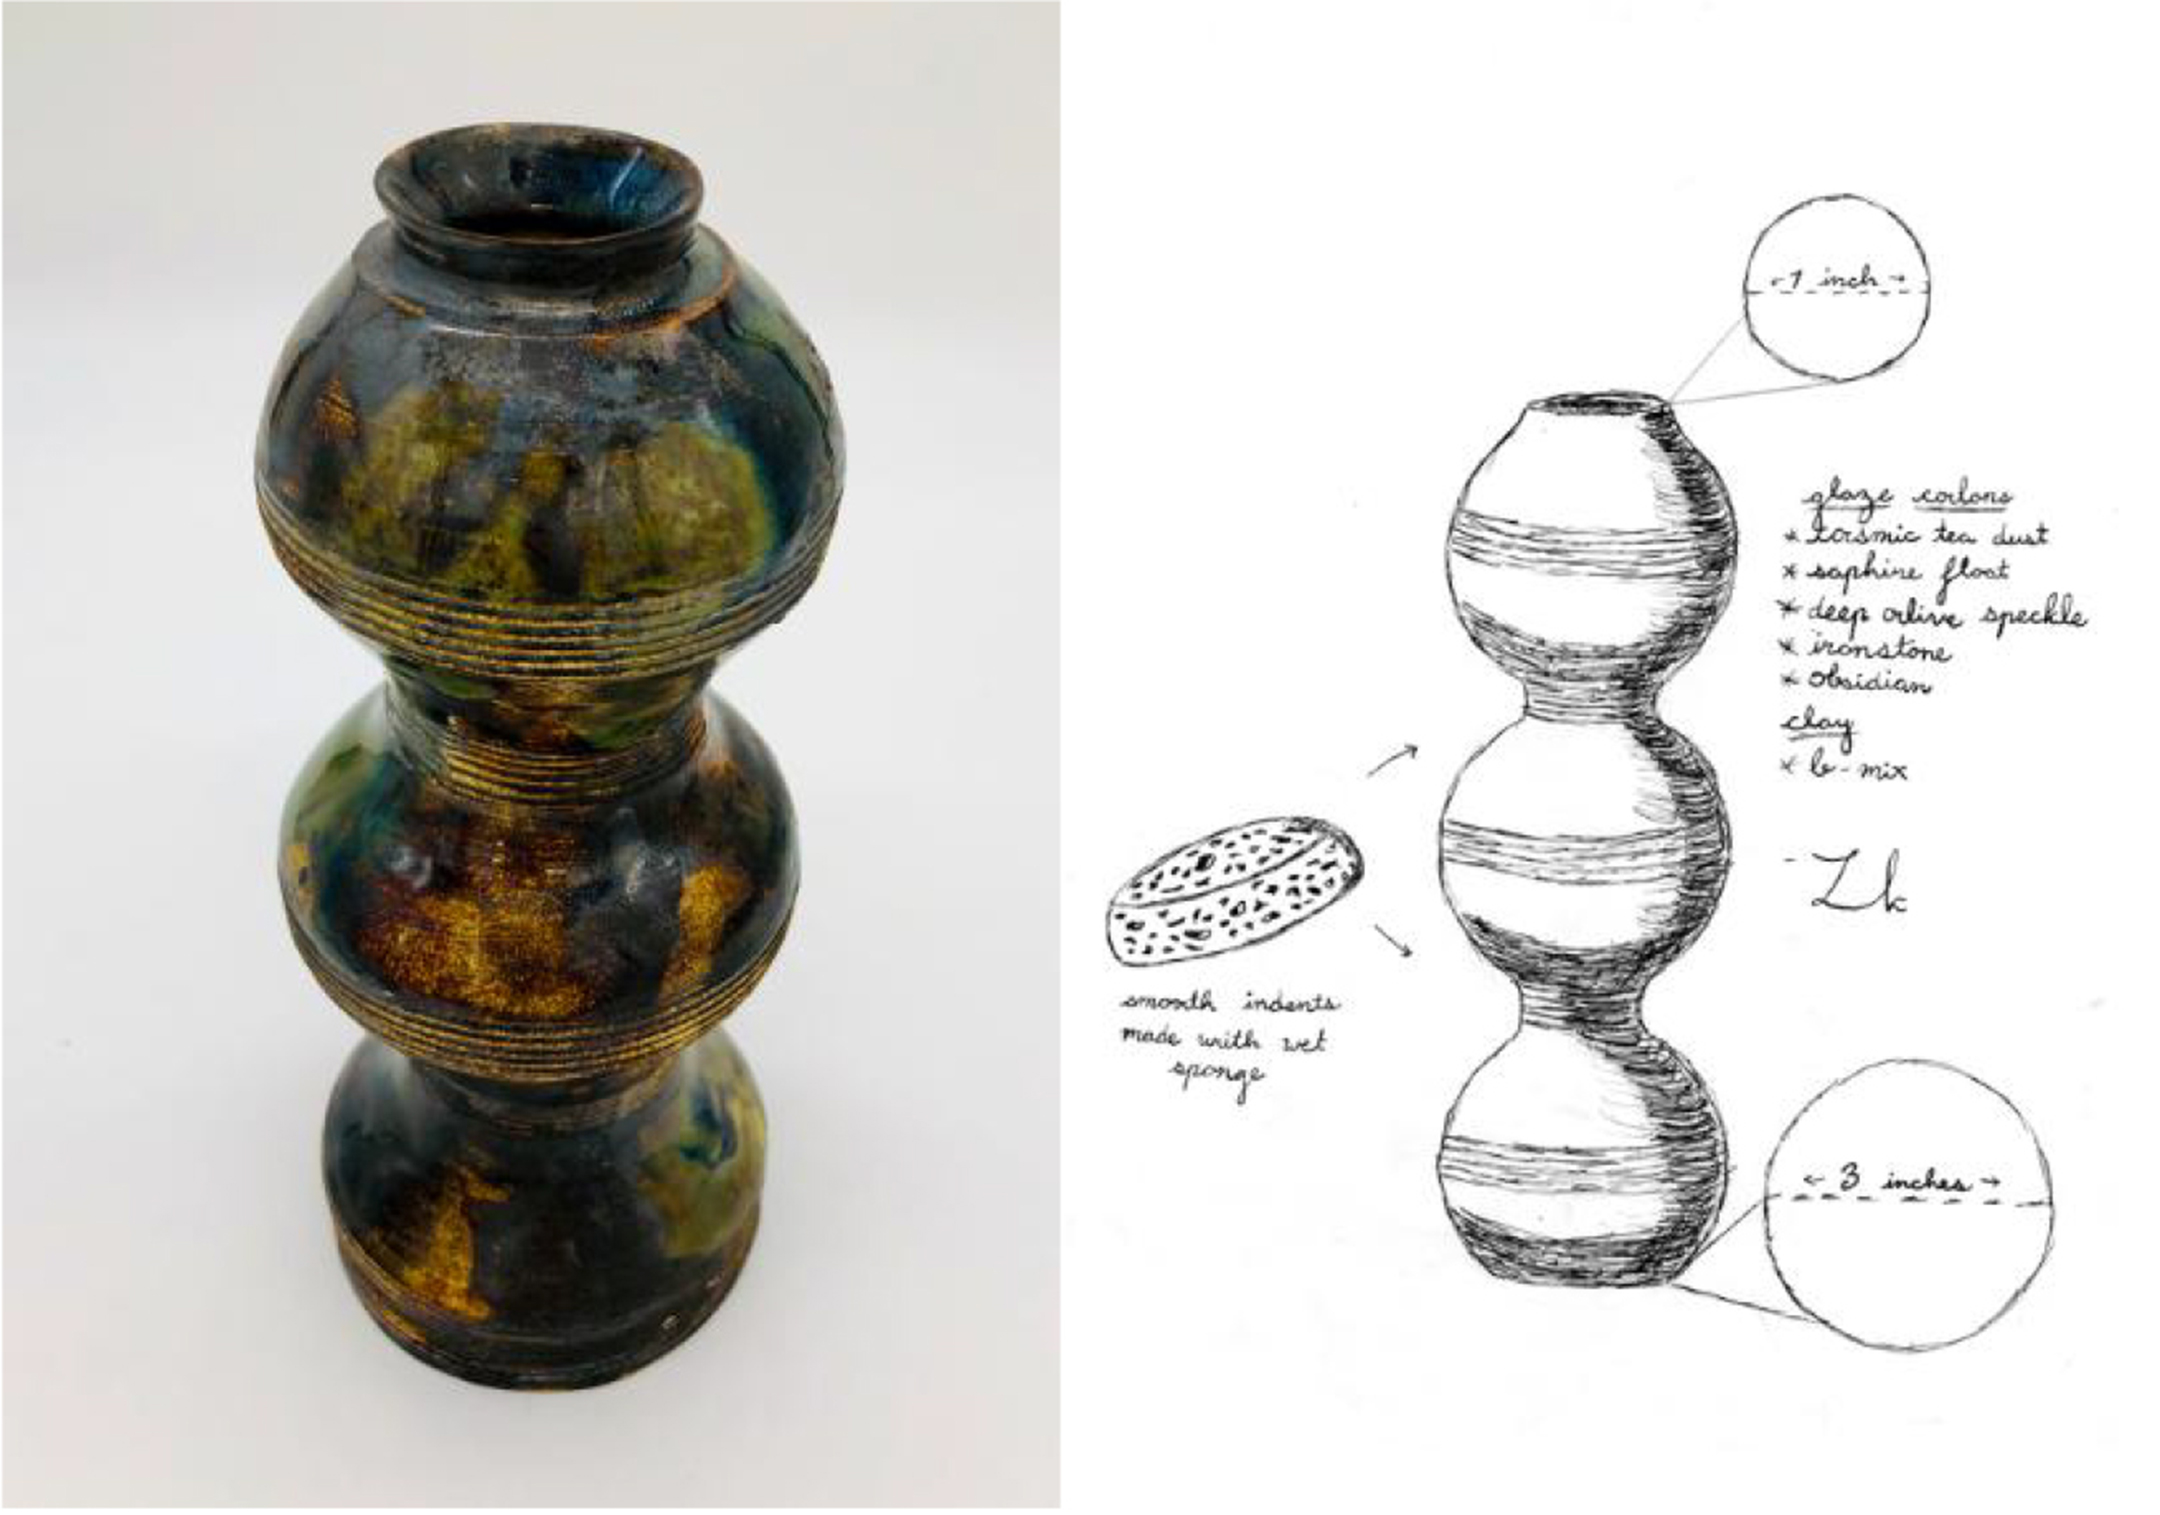 photo of a bottle with two bumpy nodes on the left, a sketch of the bottle on the right